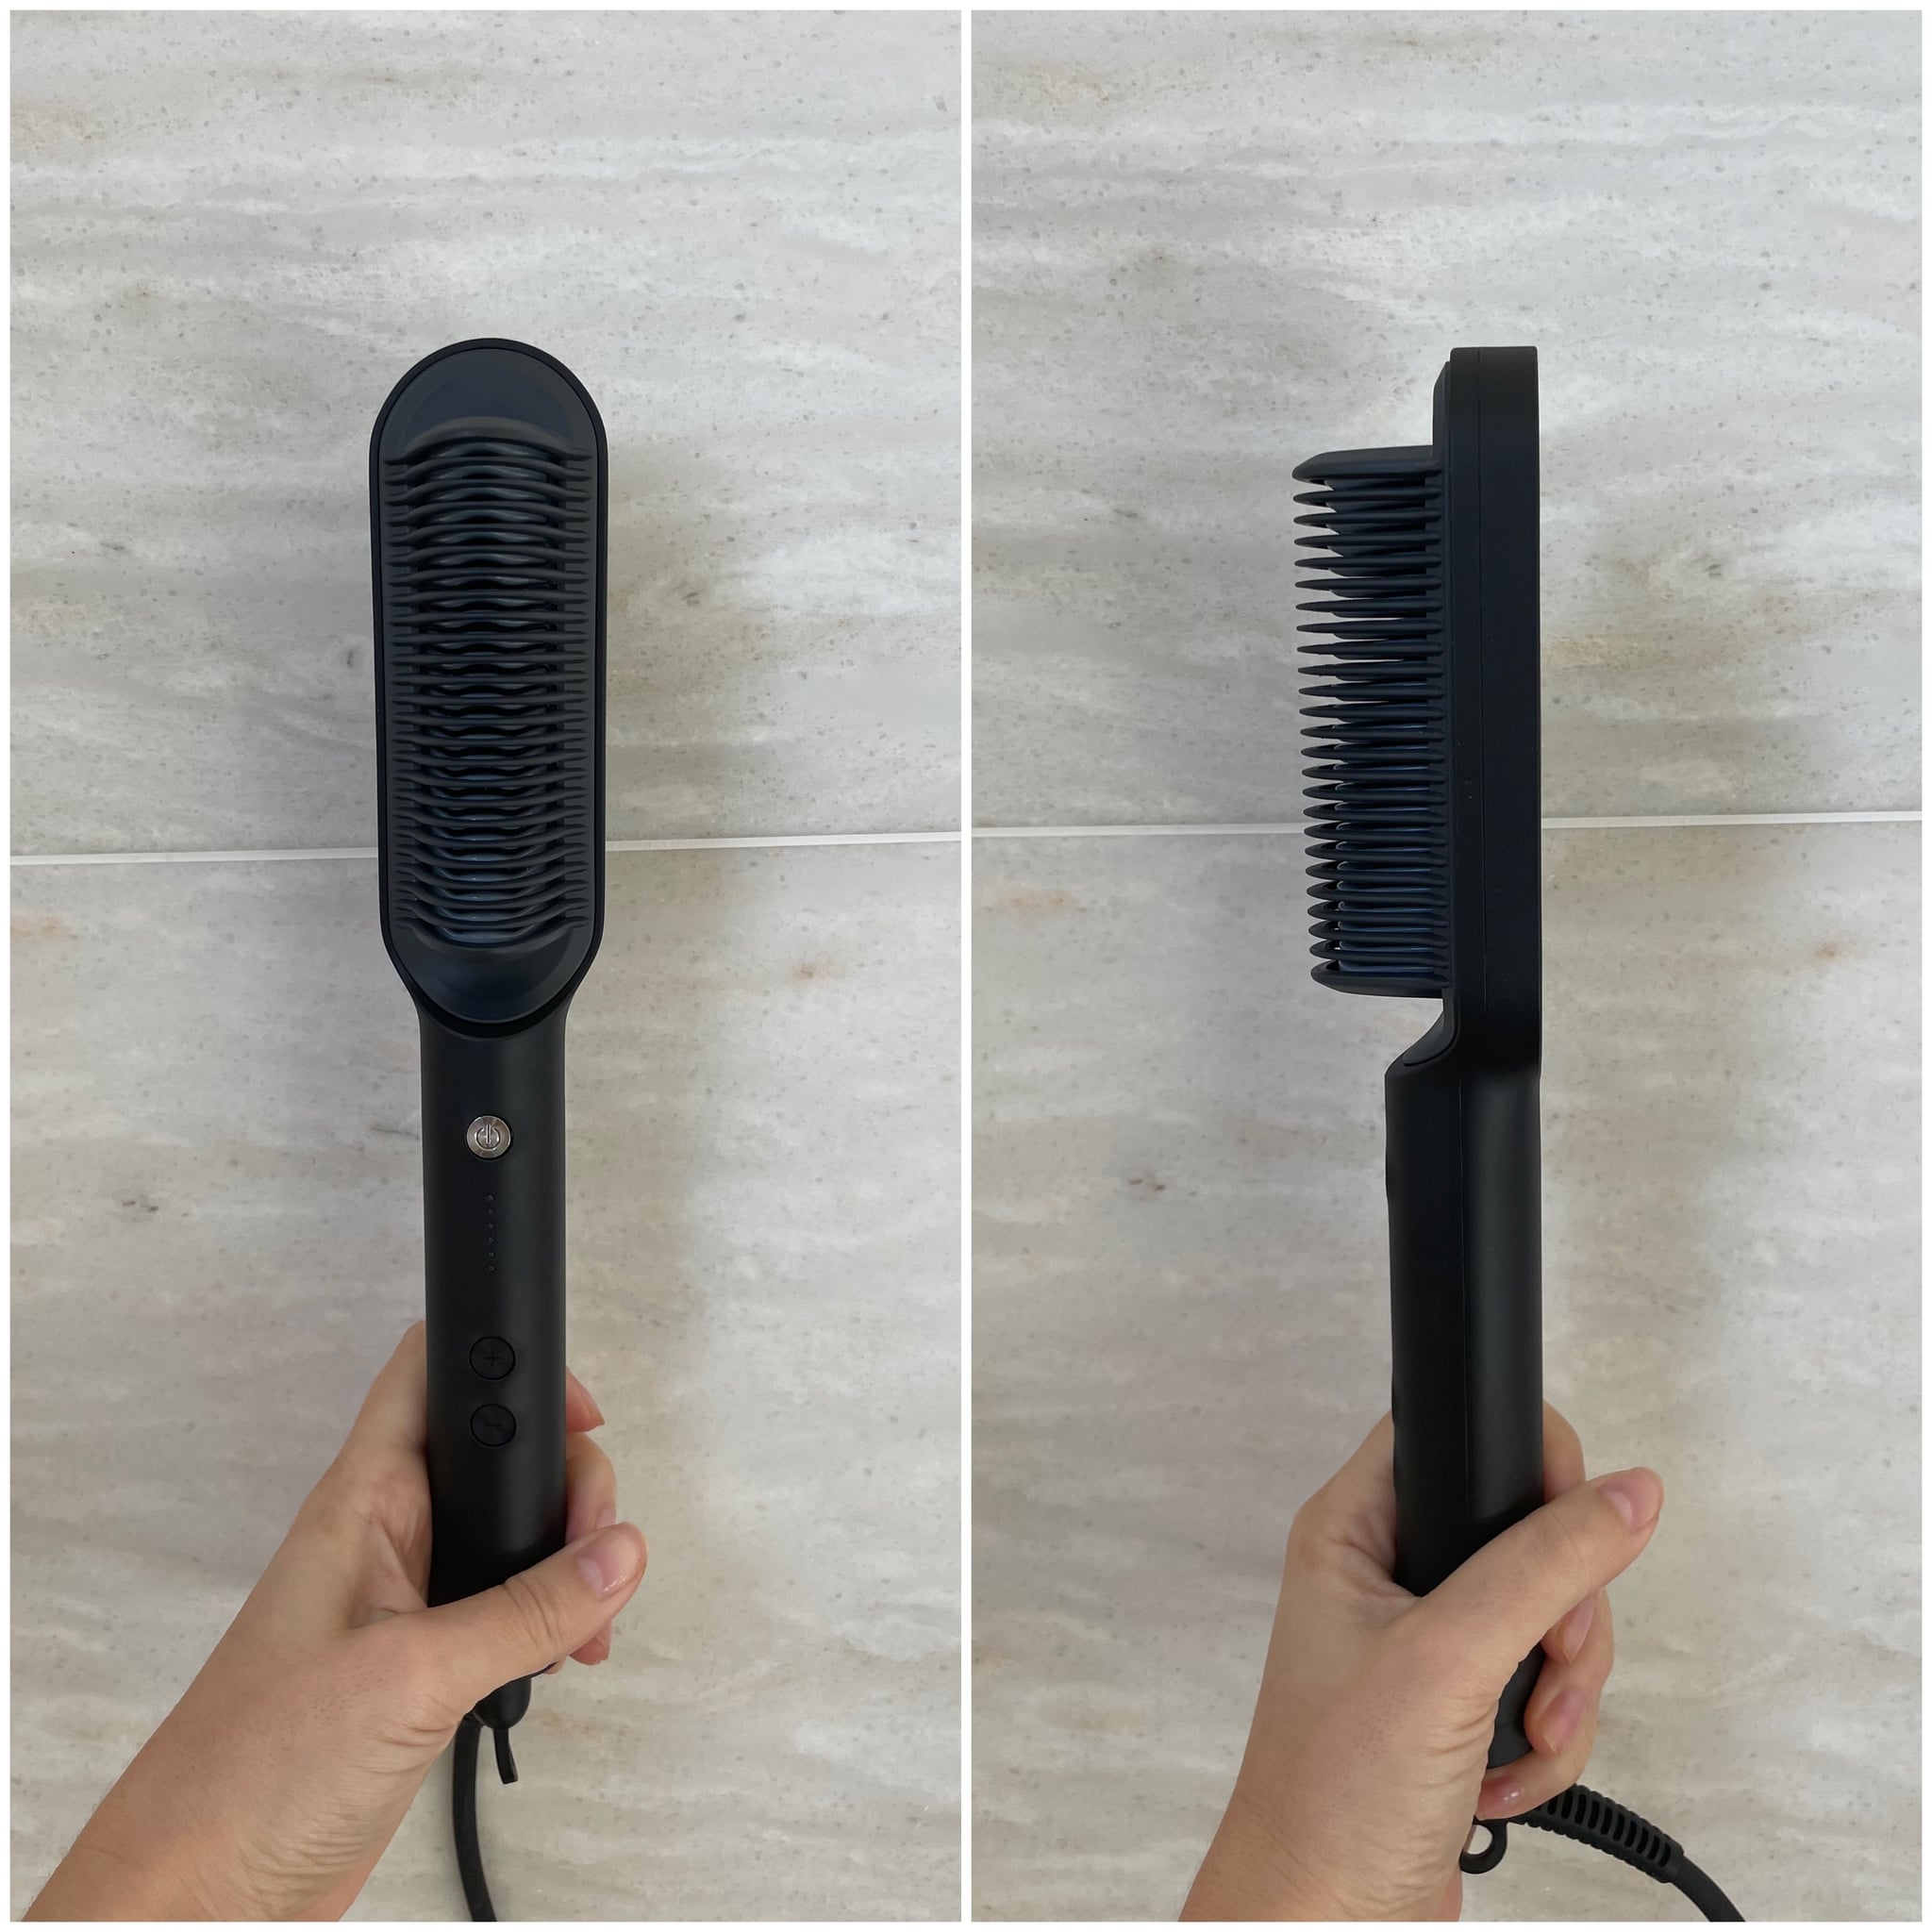 Tymo Ring Hair Straightener Comb Review With Photos | POPSUGAR Beauty